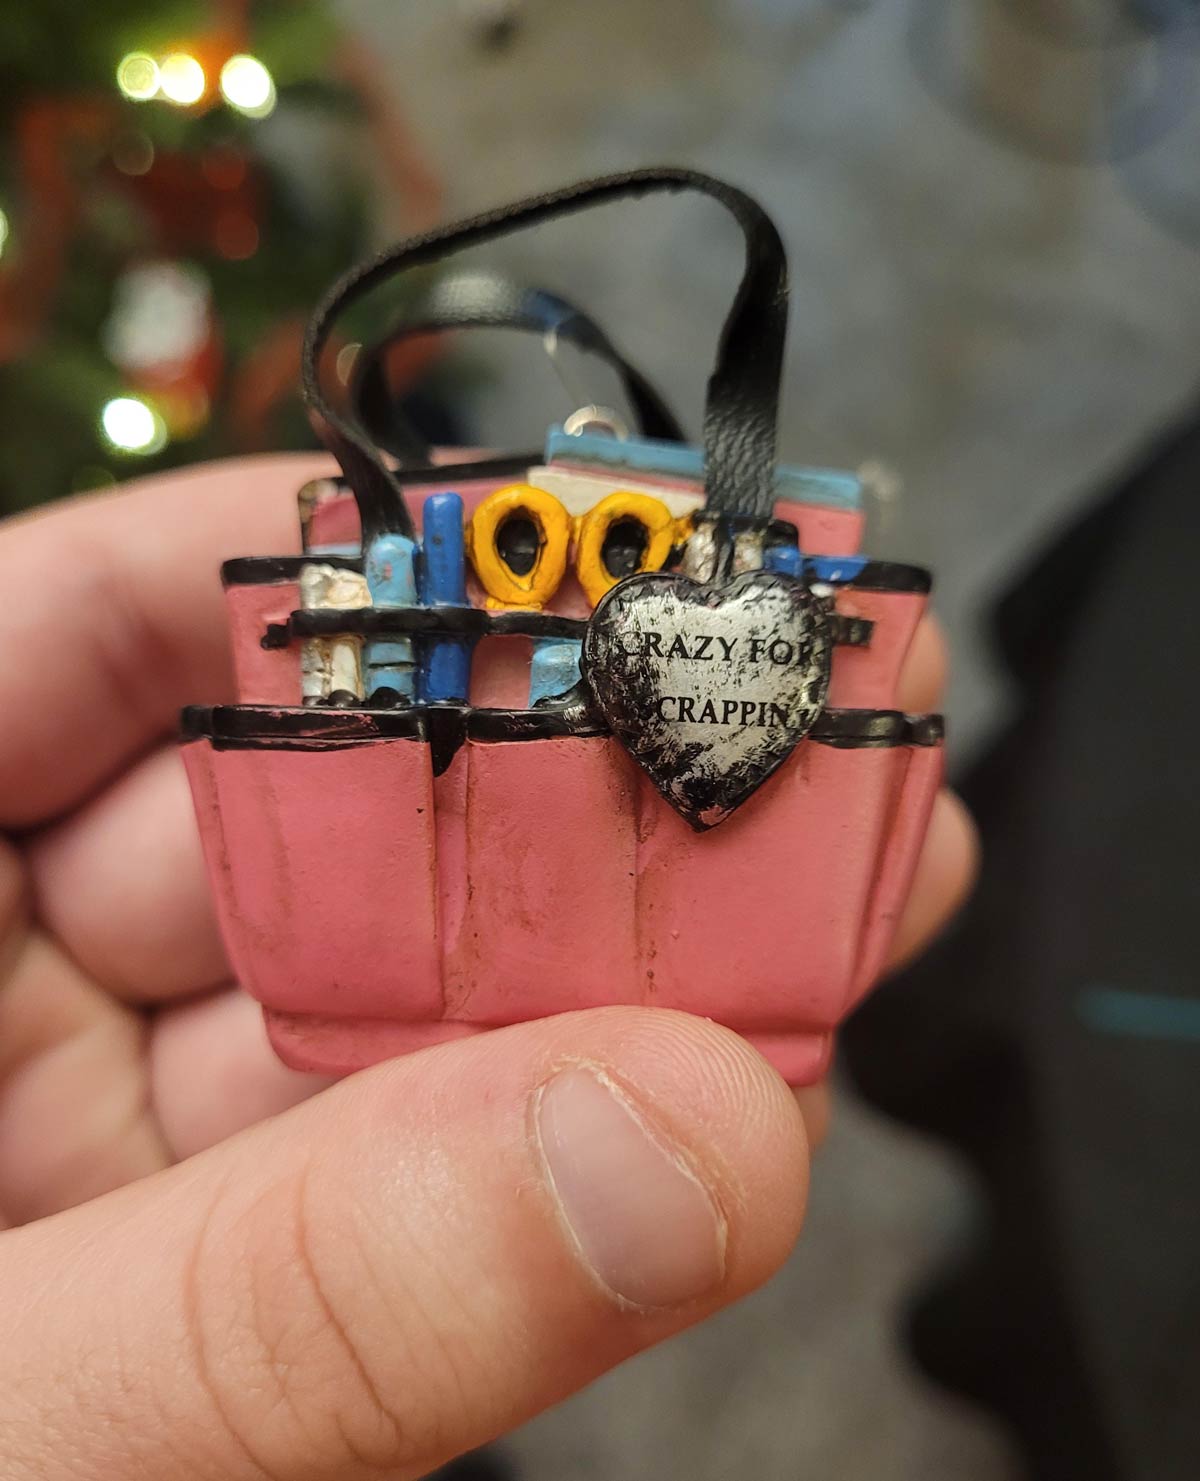 My family started putting up our Christmas tree. This ornament that we've had for years is meant to say "Crazy for Scrappin'". Weirdly, it still works for one of us